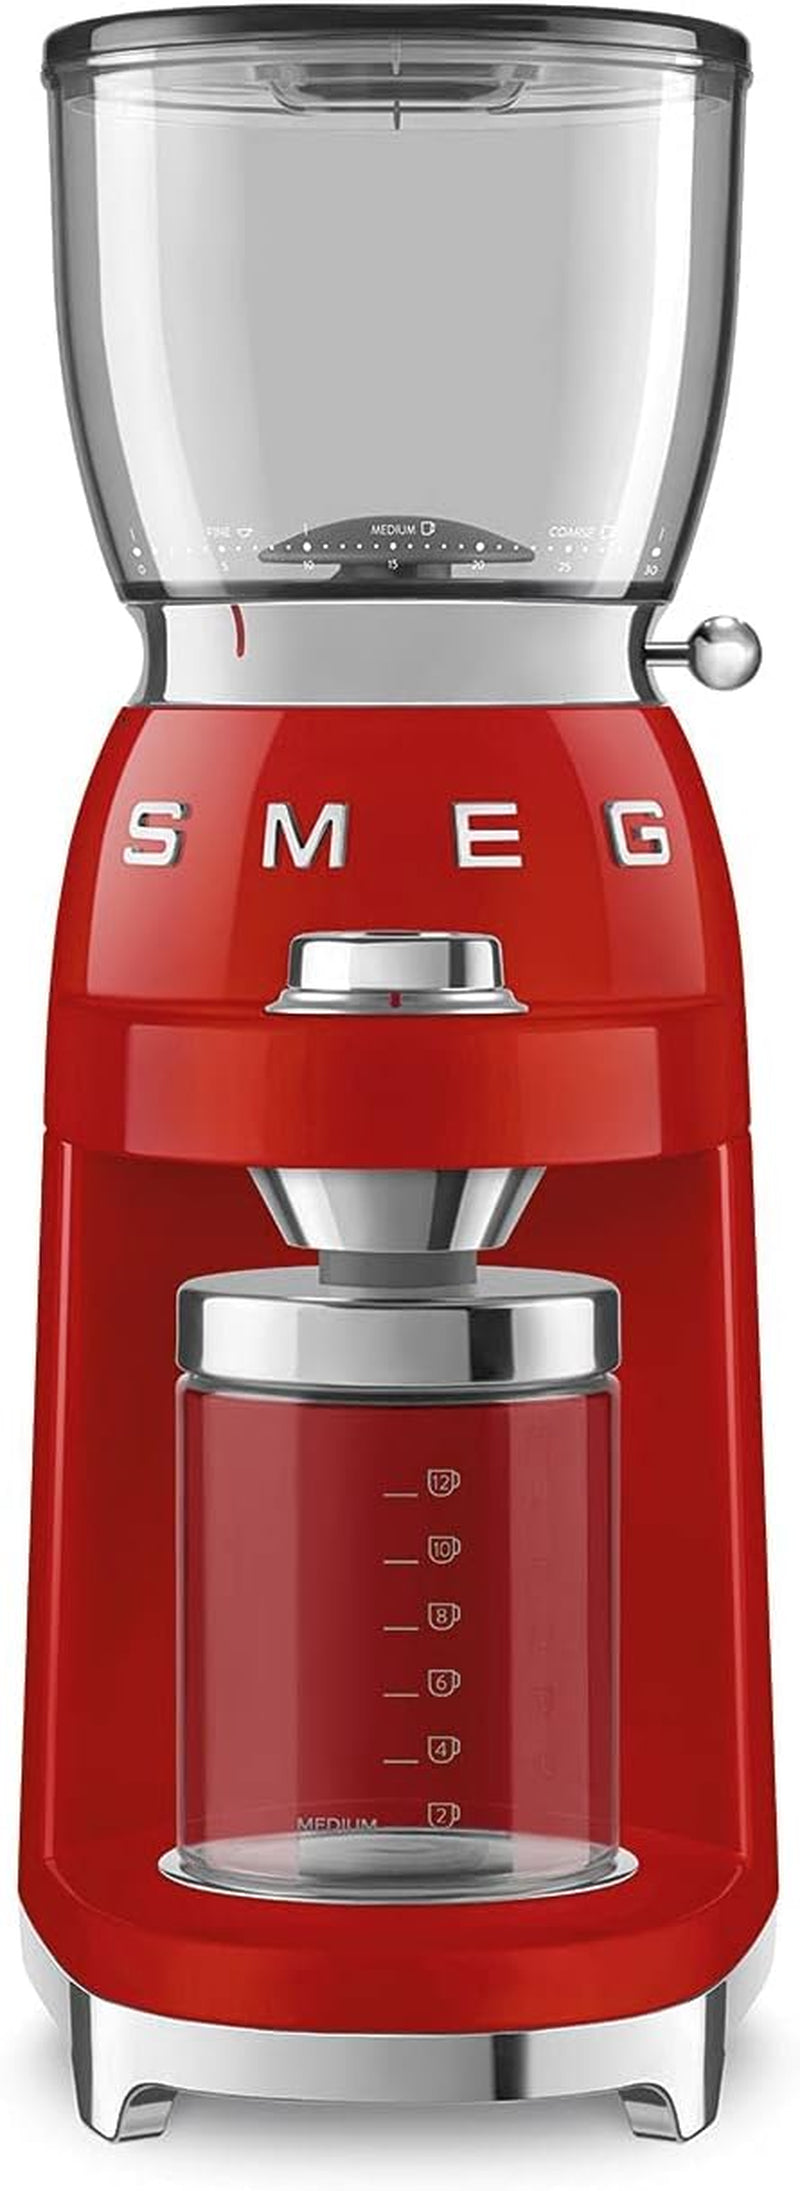 50'S Retro Style Aesthetic Coffee Grinder, CGF01 (Red) Large